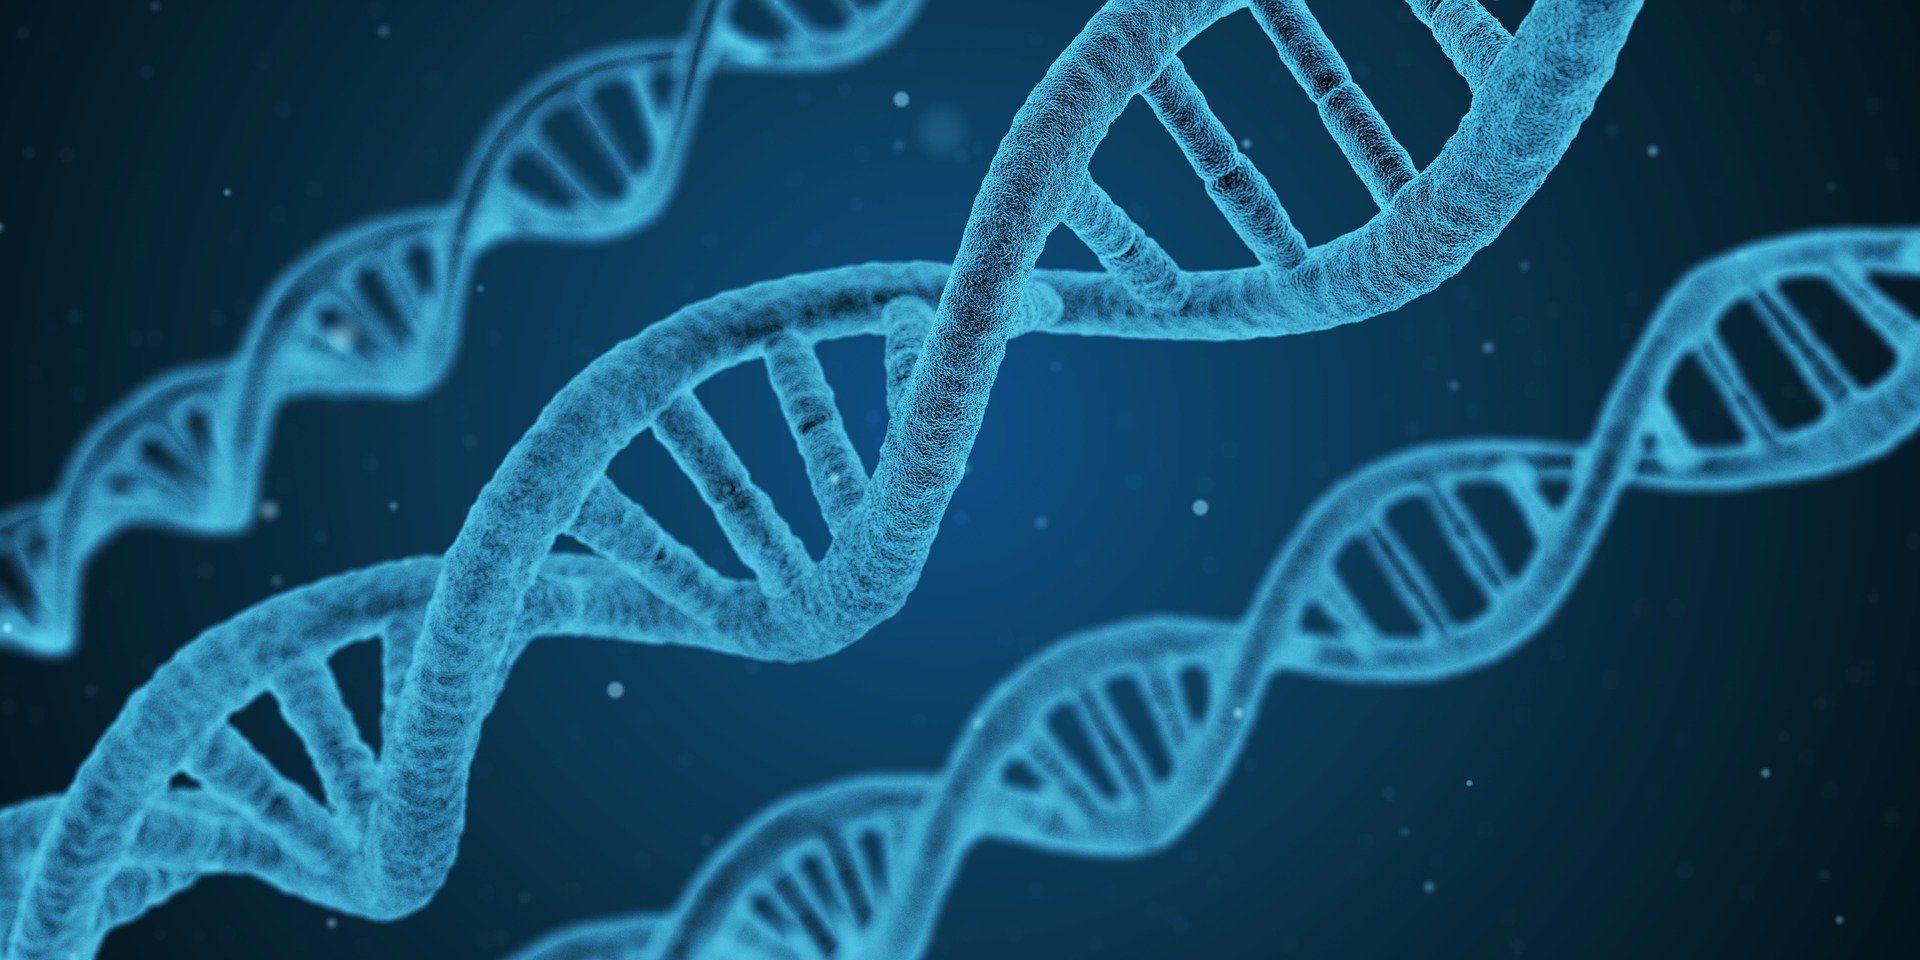 Nature vs. Nurture - DNA with a blue background